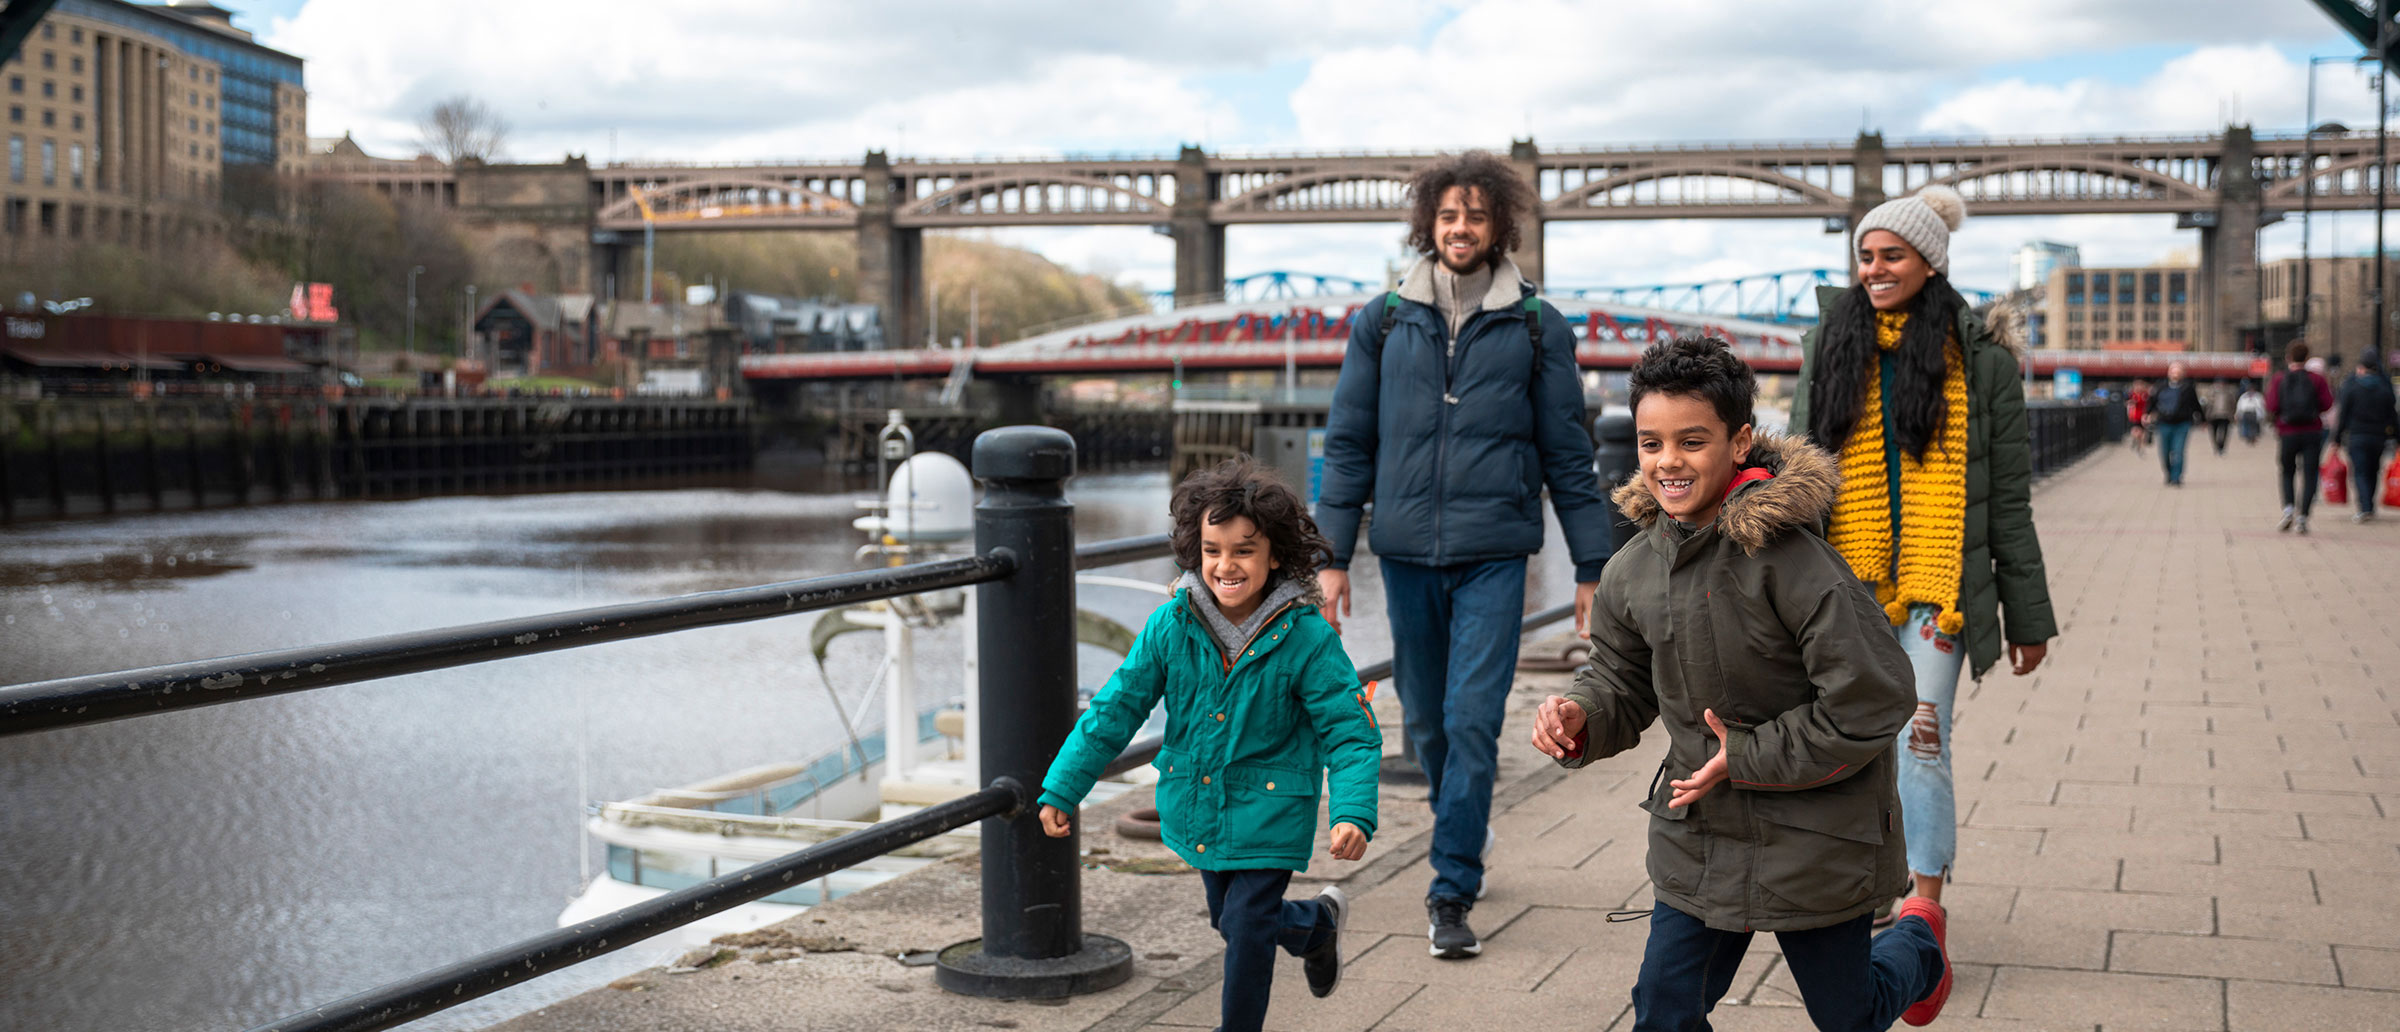 Children dressed for winter. run happily ahead of their parents as they walk along a pier.